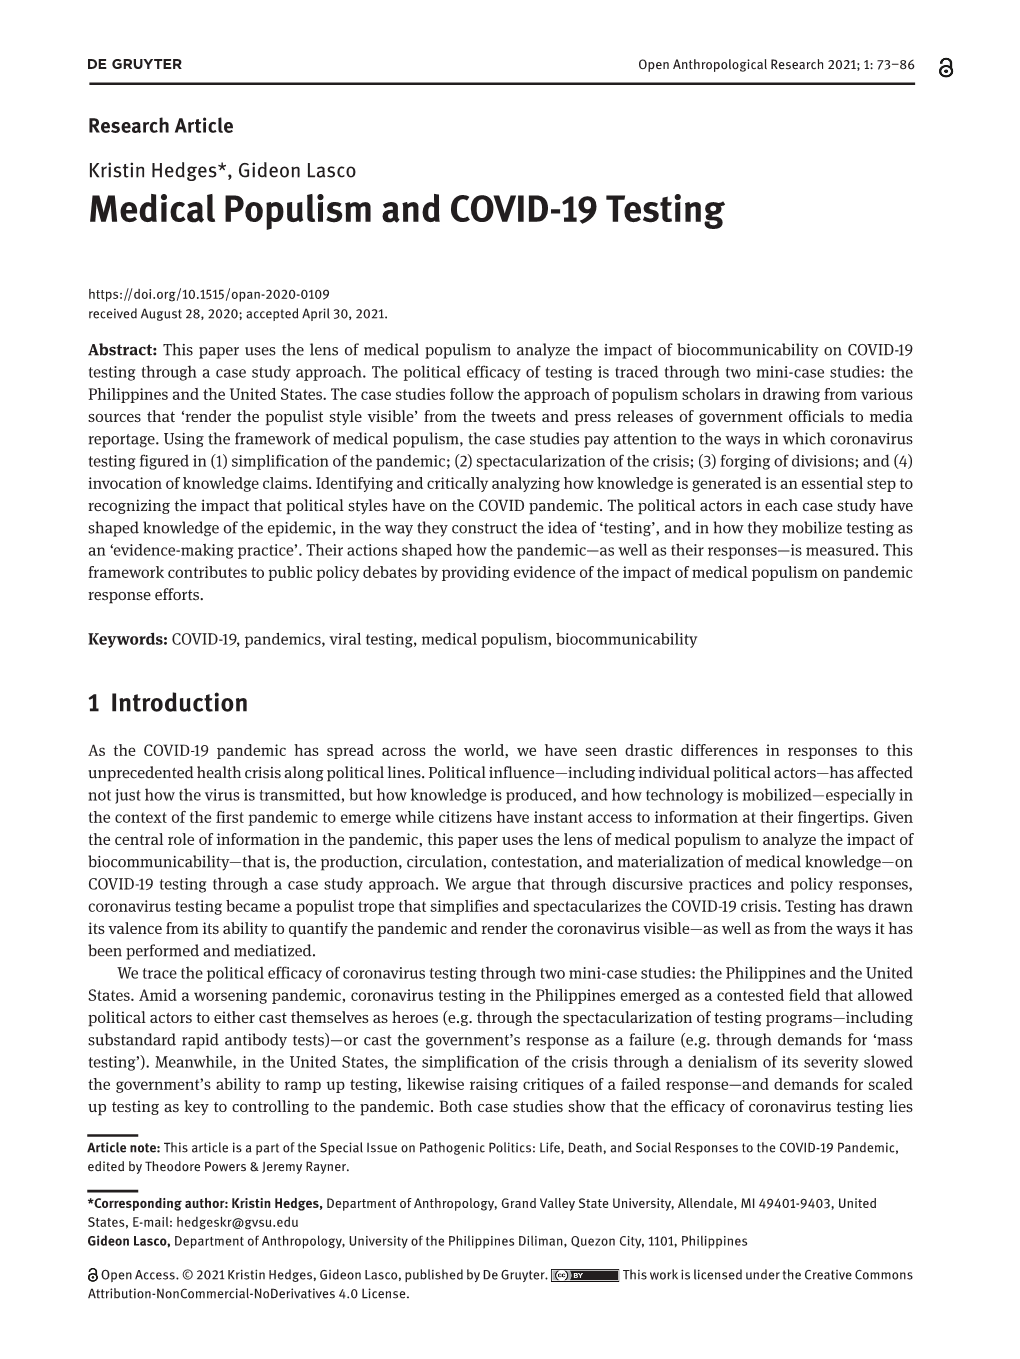 Medical Populism and COVID-19 Testing